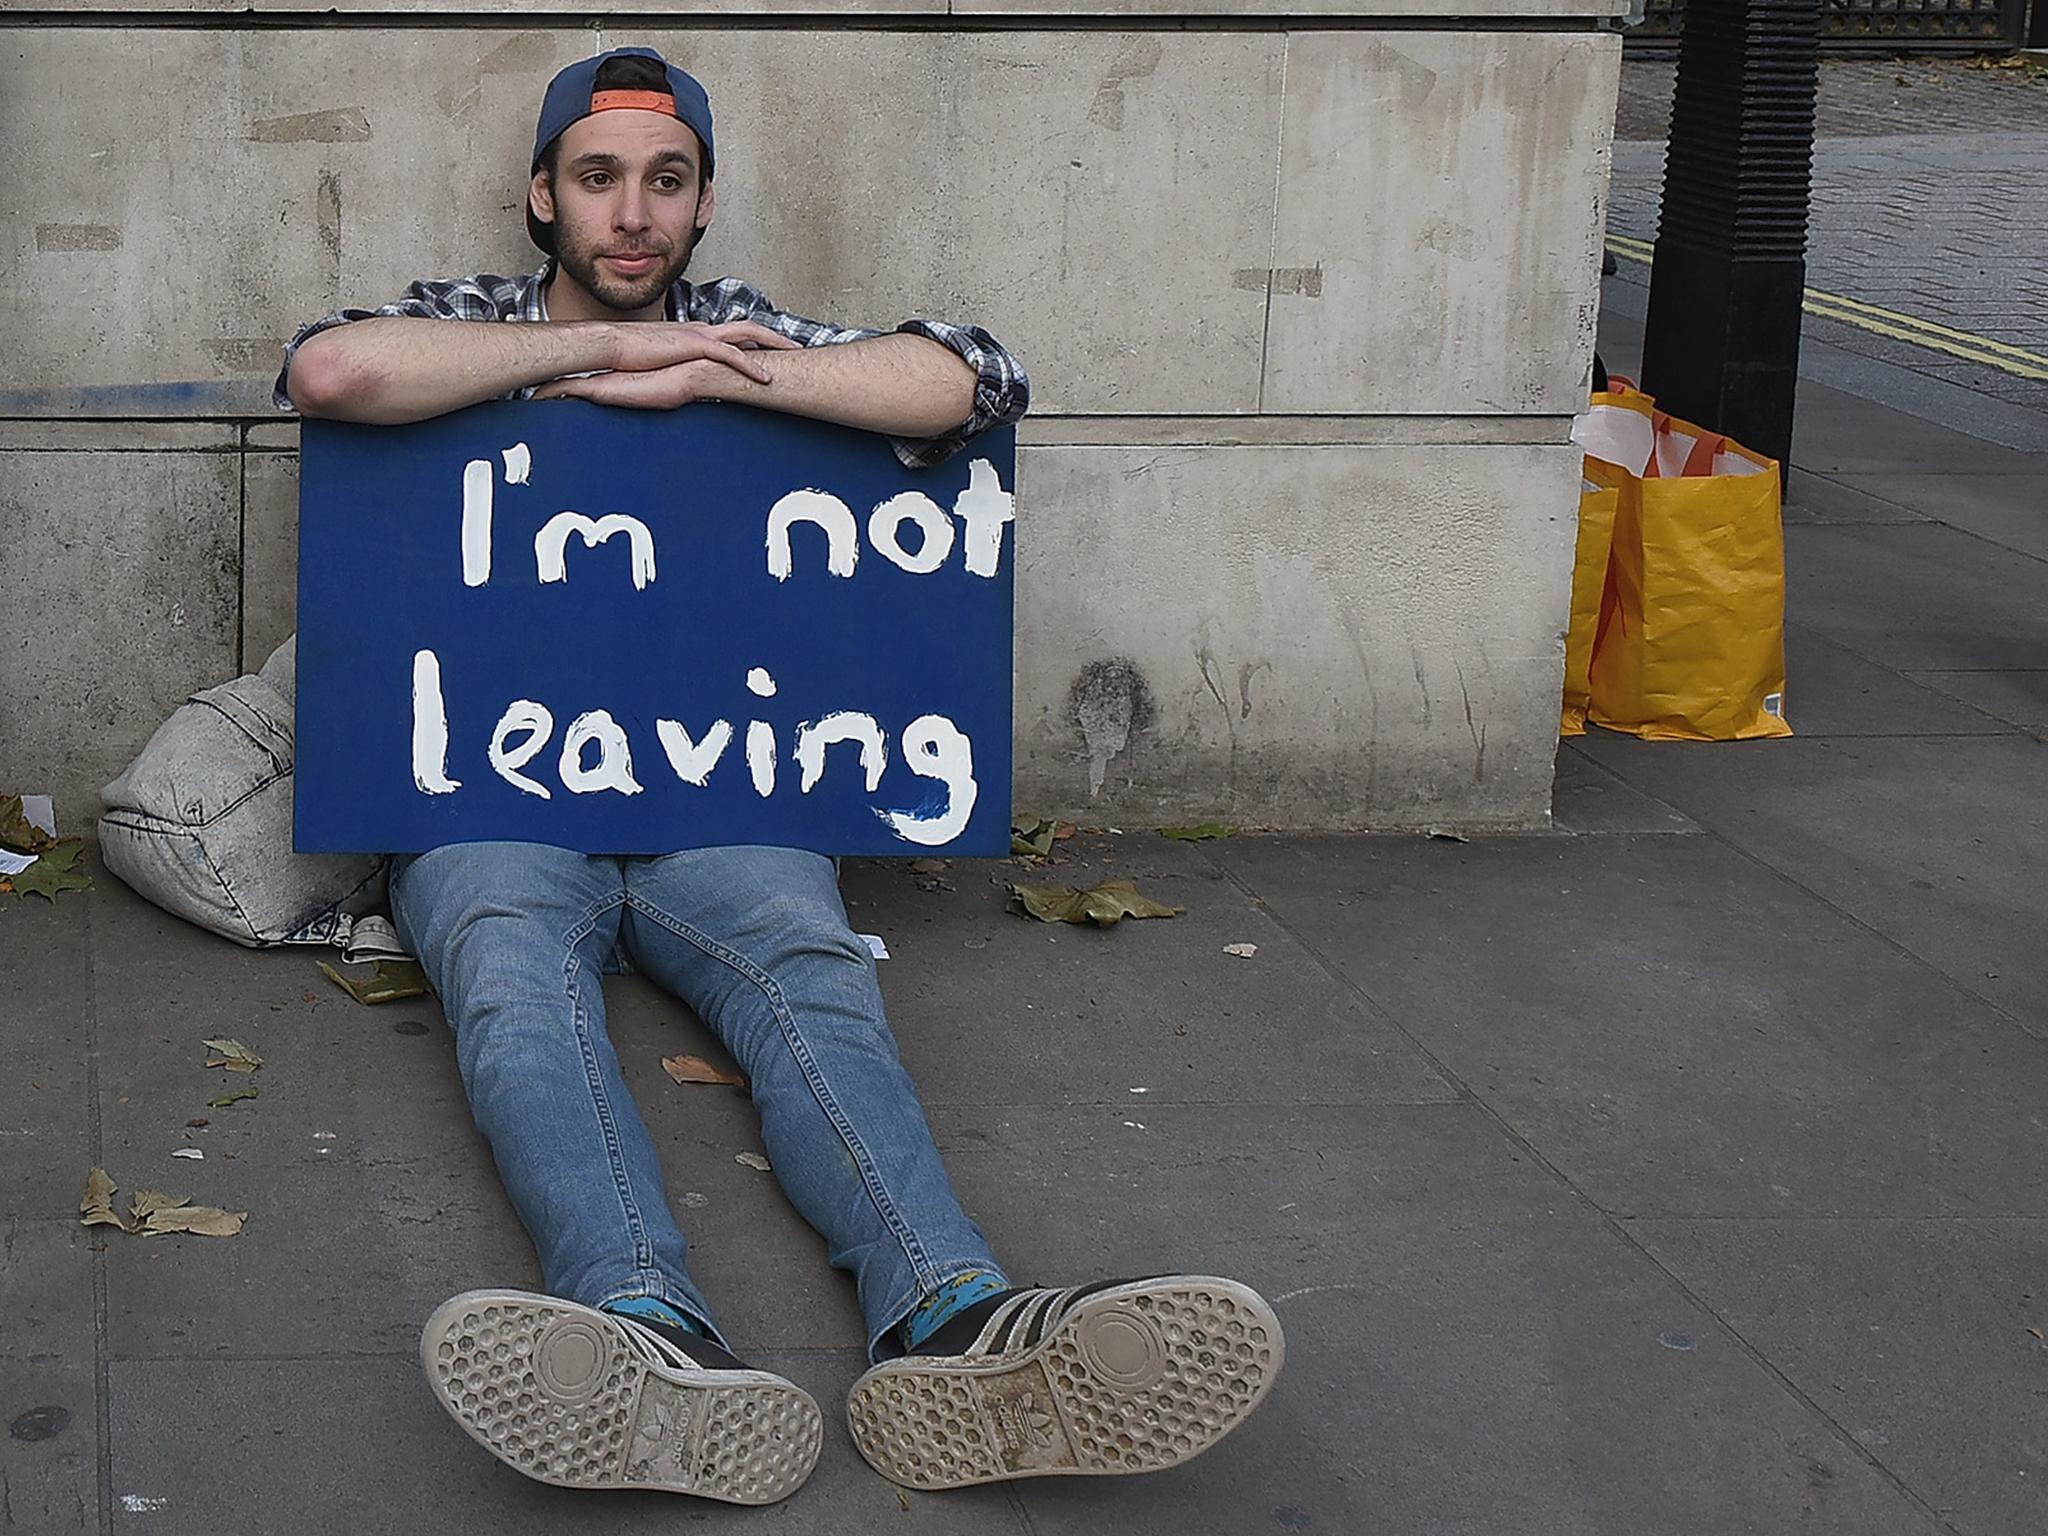 A young man makes his Brexit stance clear during a protest in central London against the UK's decision to leave the EU on Thursday